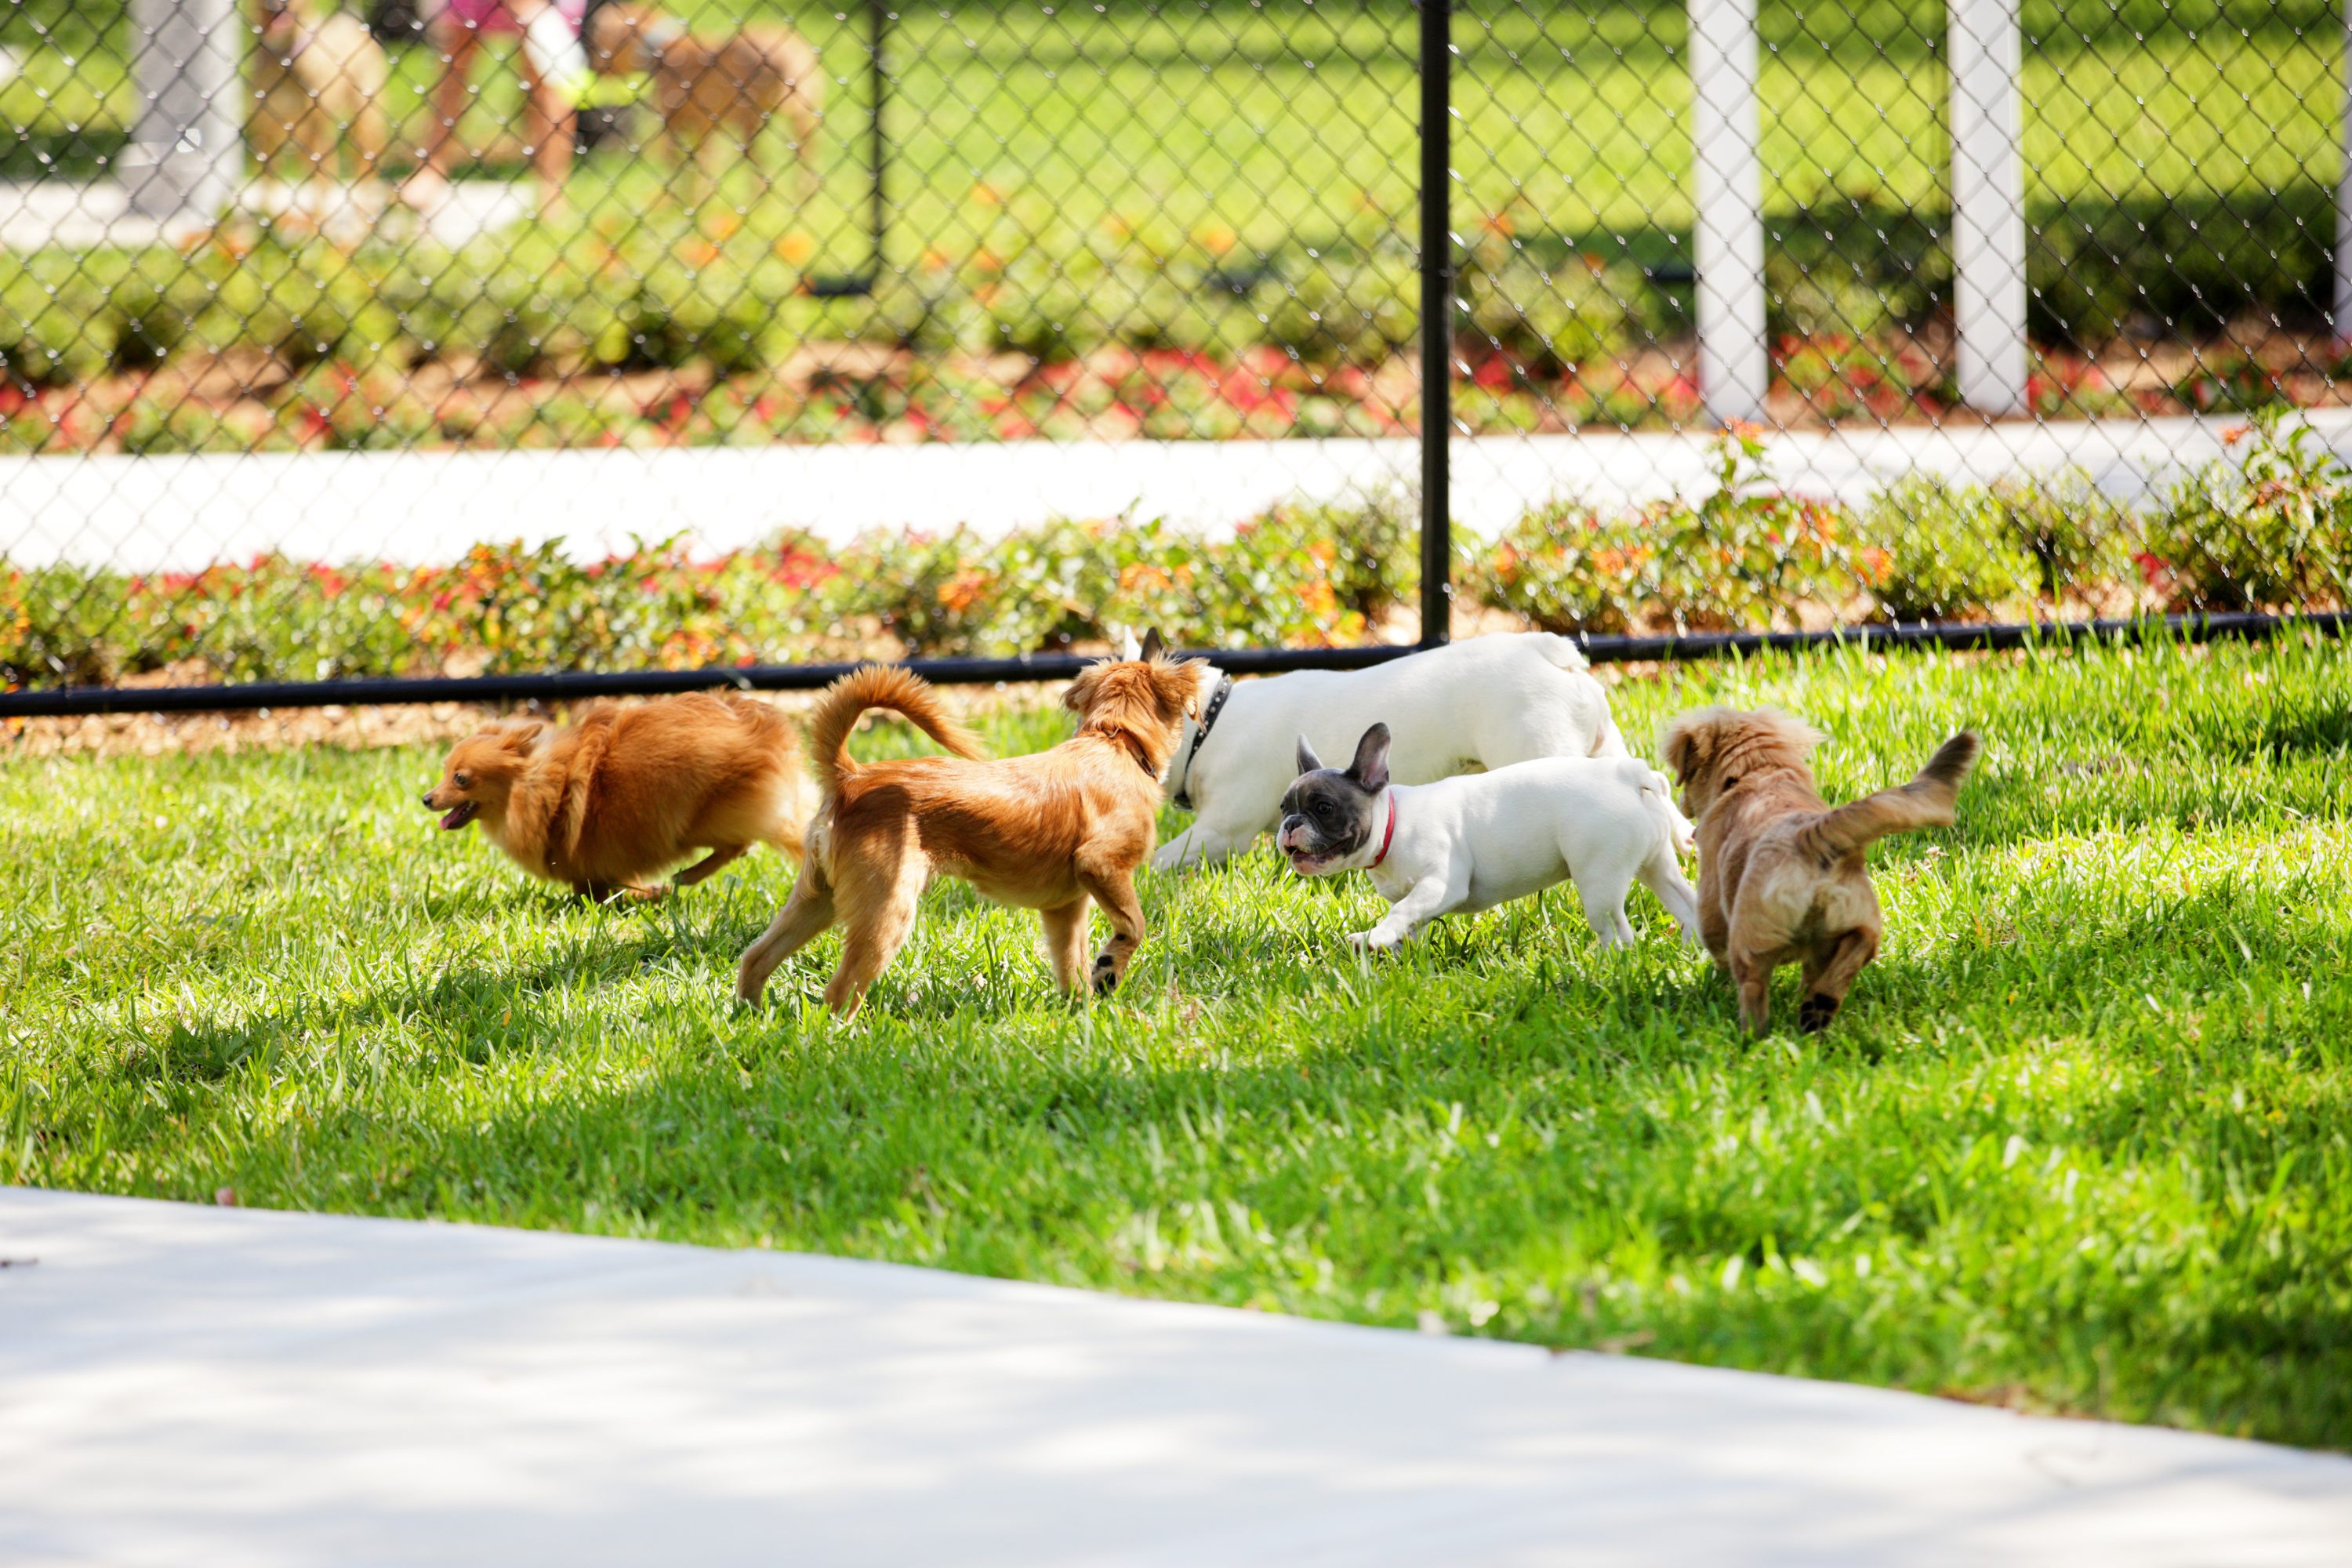 Ten Tips For Planning And Building A Dog Park in Your Community